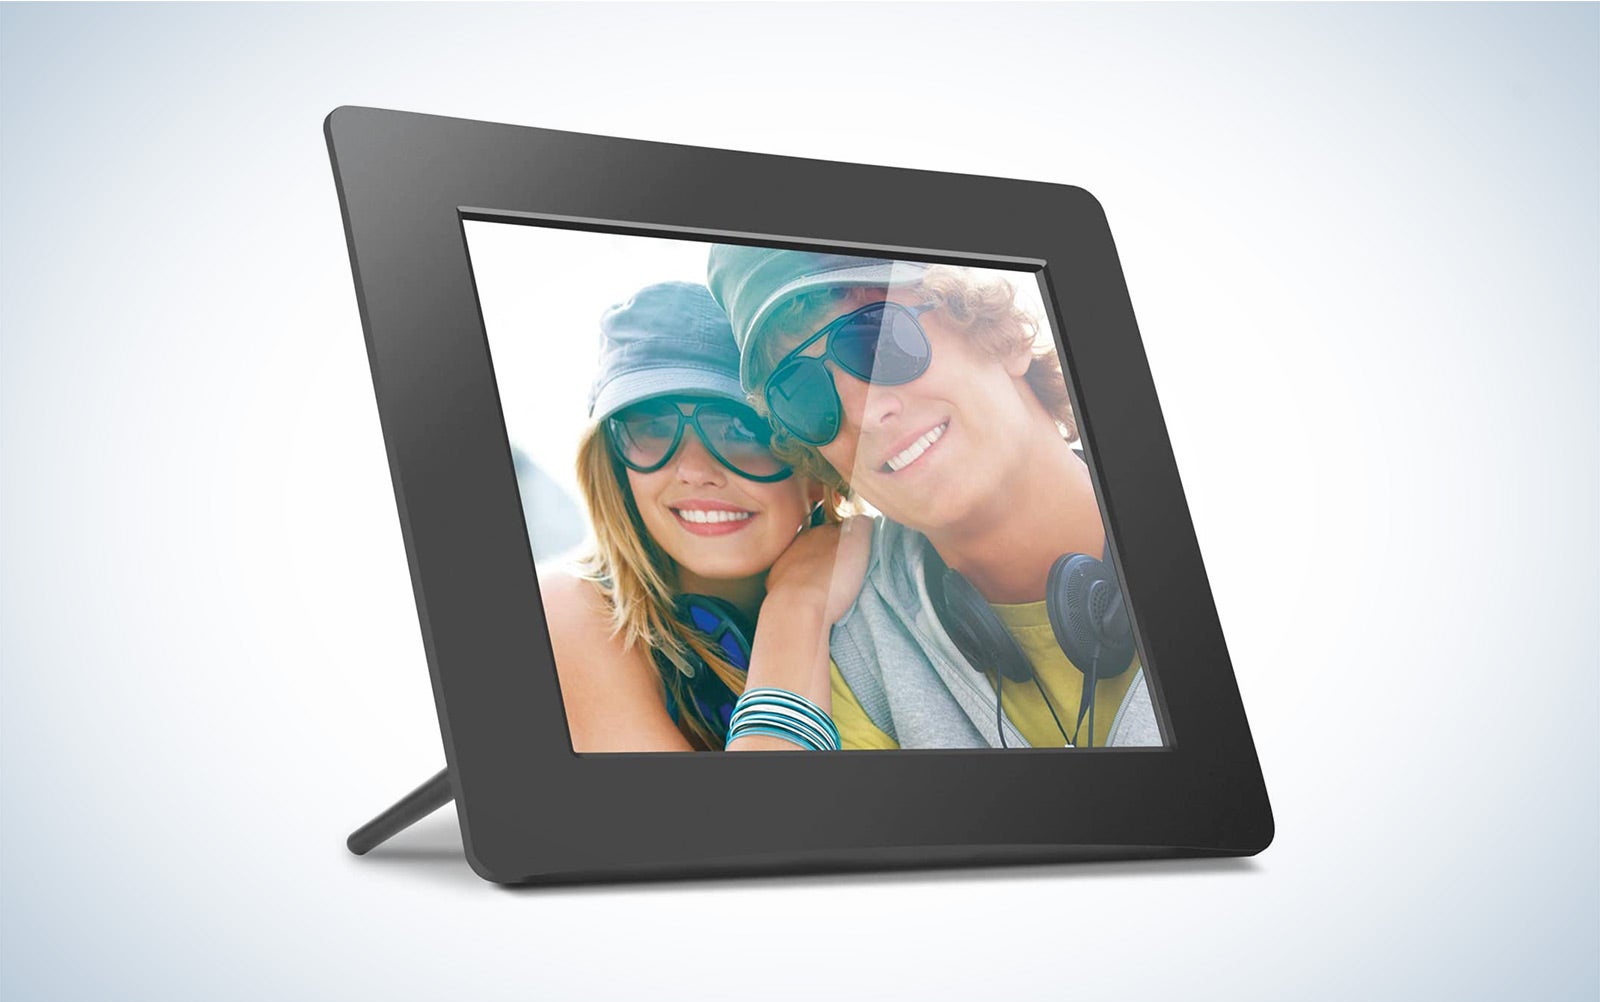 The Aluratek 7-inch Photo Frame is the best cheap digital picture frame.